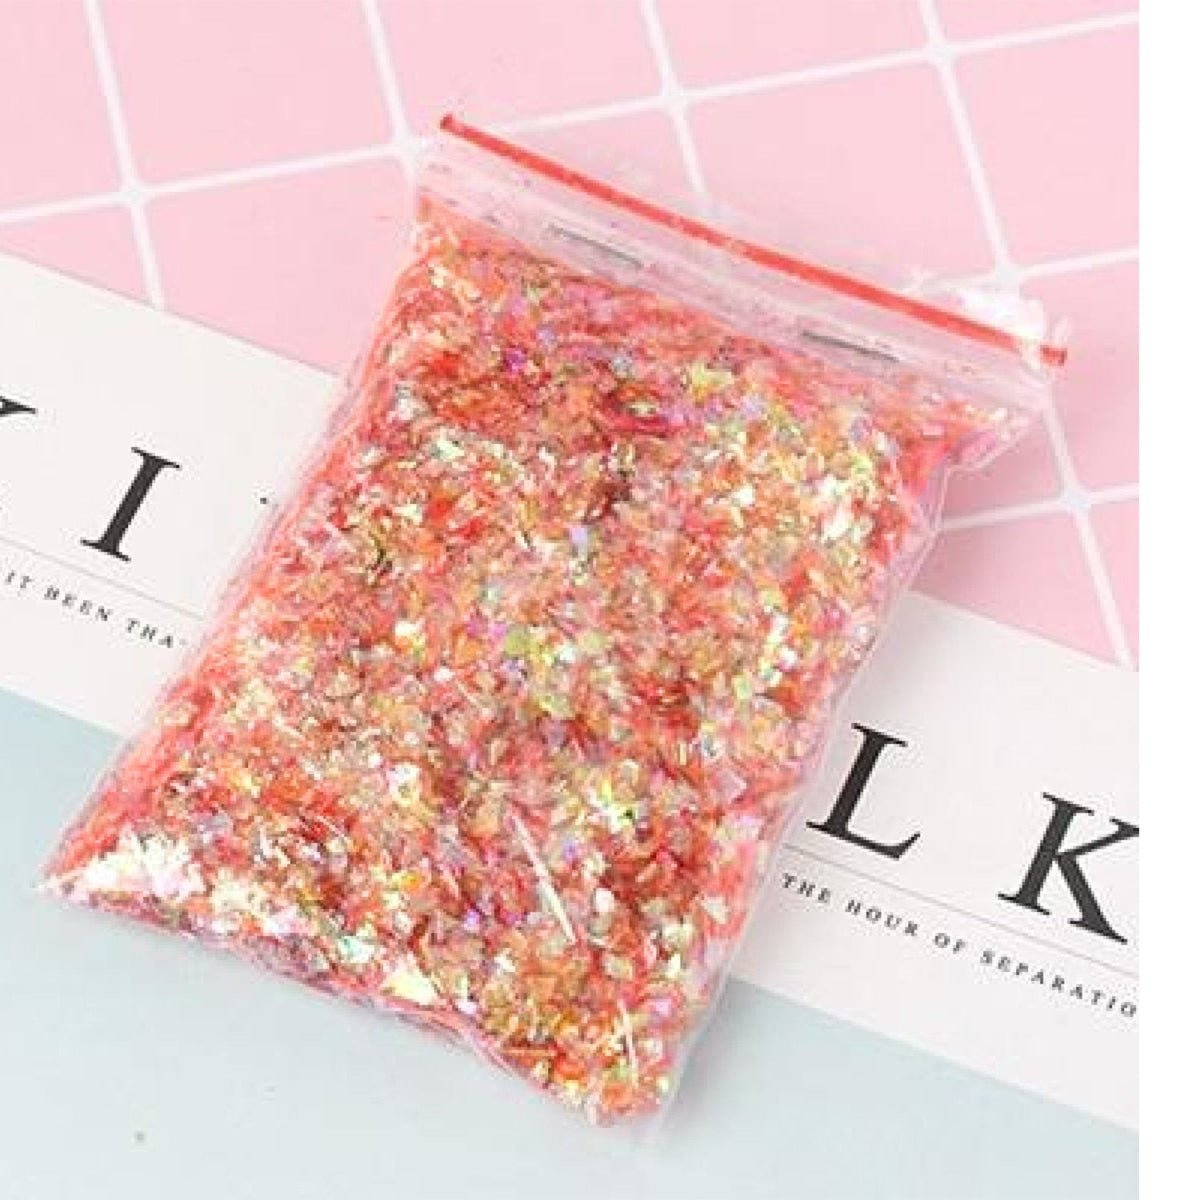 200g Holographic Nail Decoration Flakes Glitter DIY Nail Art 3D Sequin - Green (w/ touch of yellow) - - Asia Sell